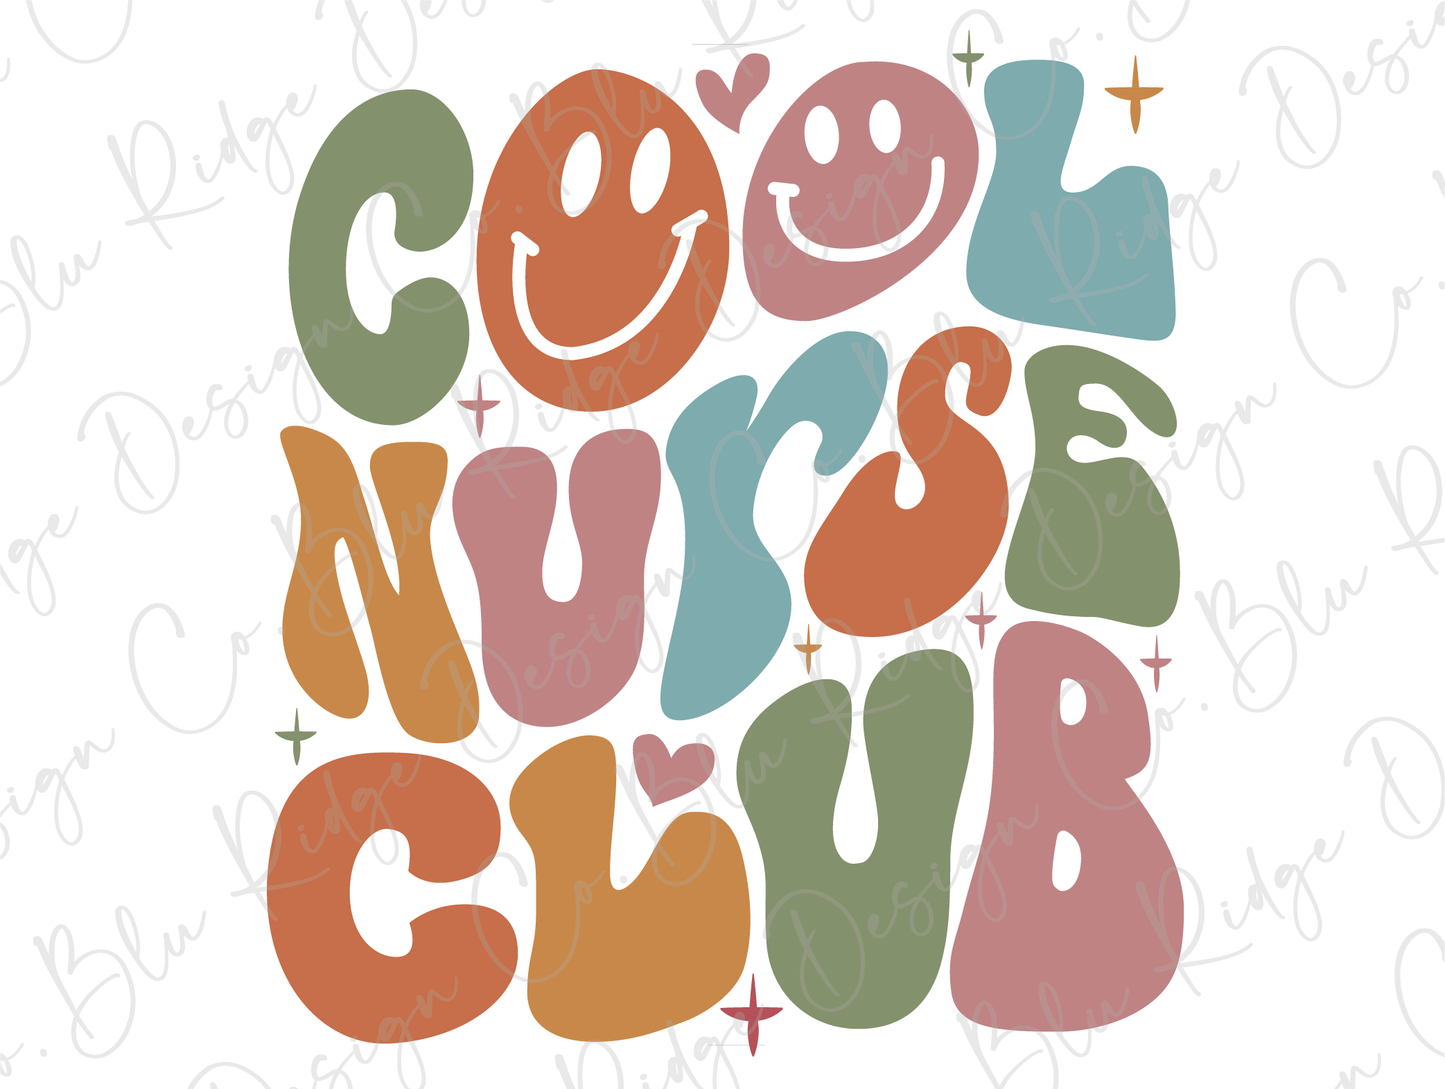 Cool Nurse Club Retro Groovy Stacked Smiley Design Direct To Film (DTF) Transfer